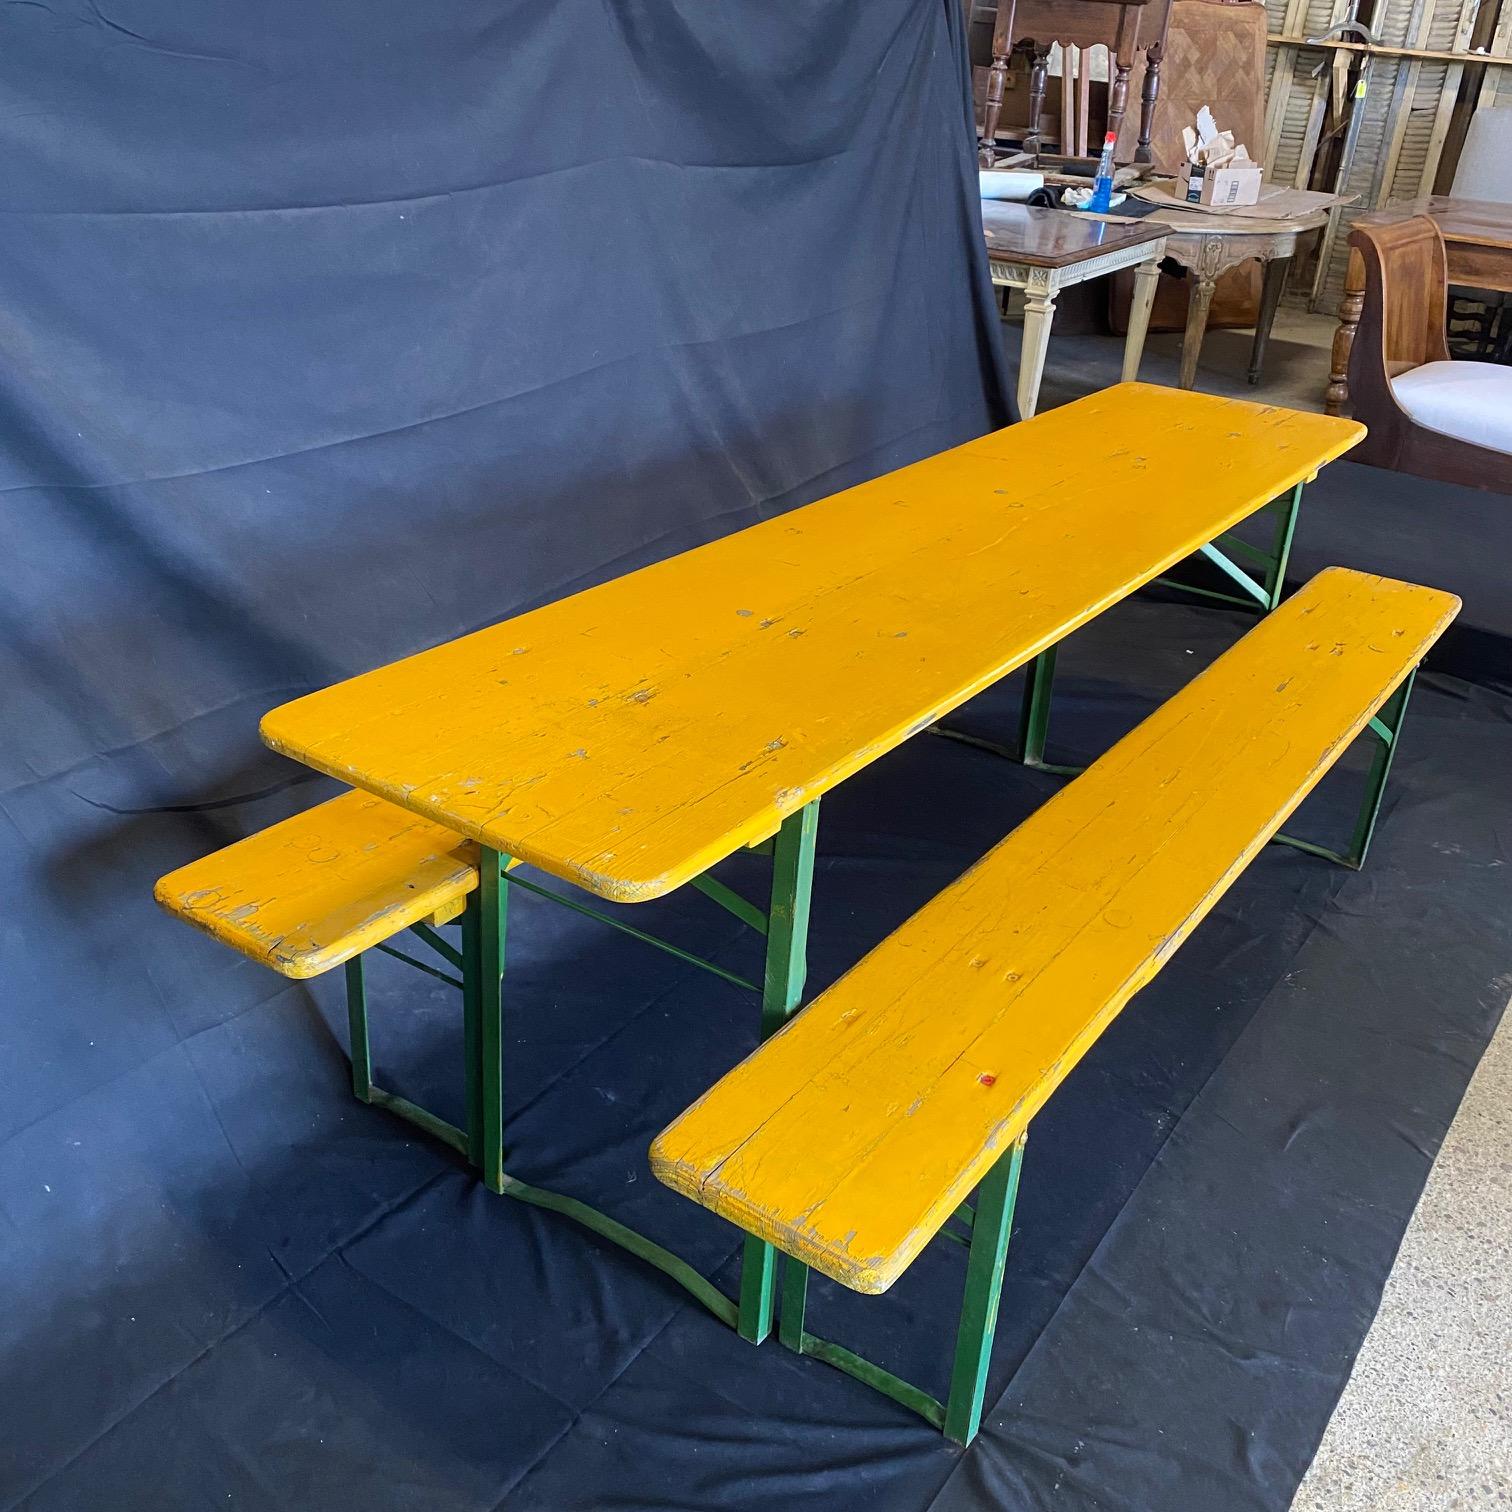 Fun Authentic Vintage Collapsible German Beer Garden Table and Bench Set In Good Condition For Sale In Hopewell, NJ